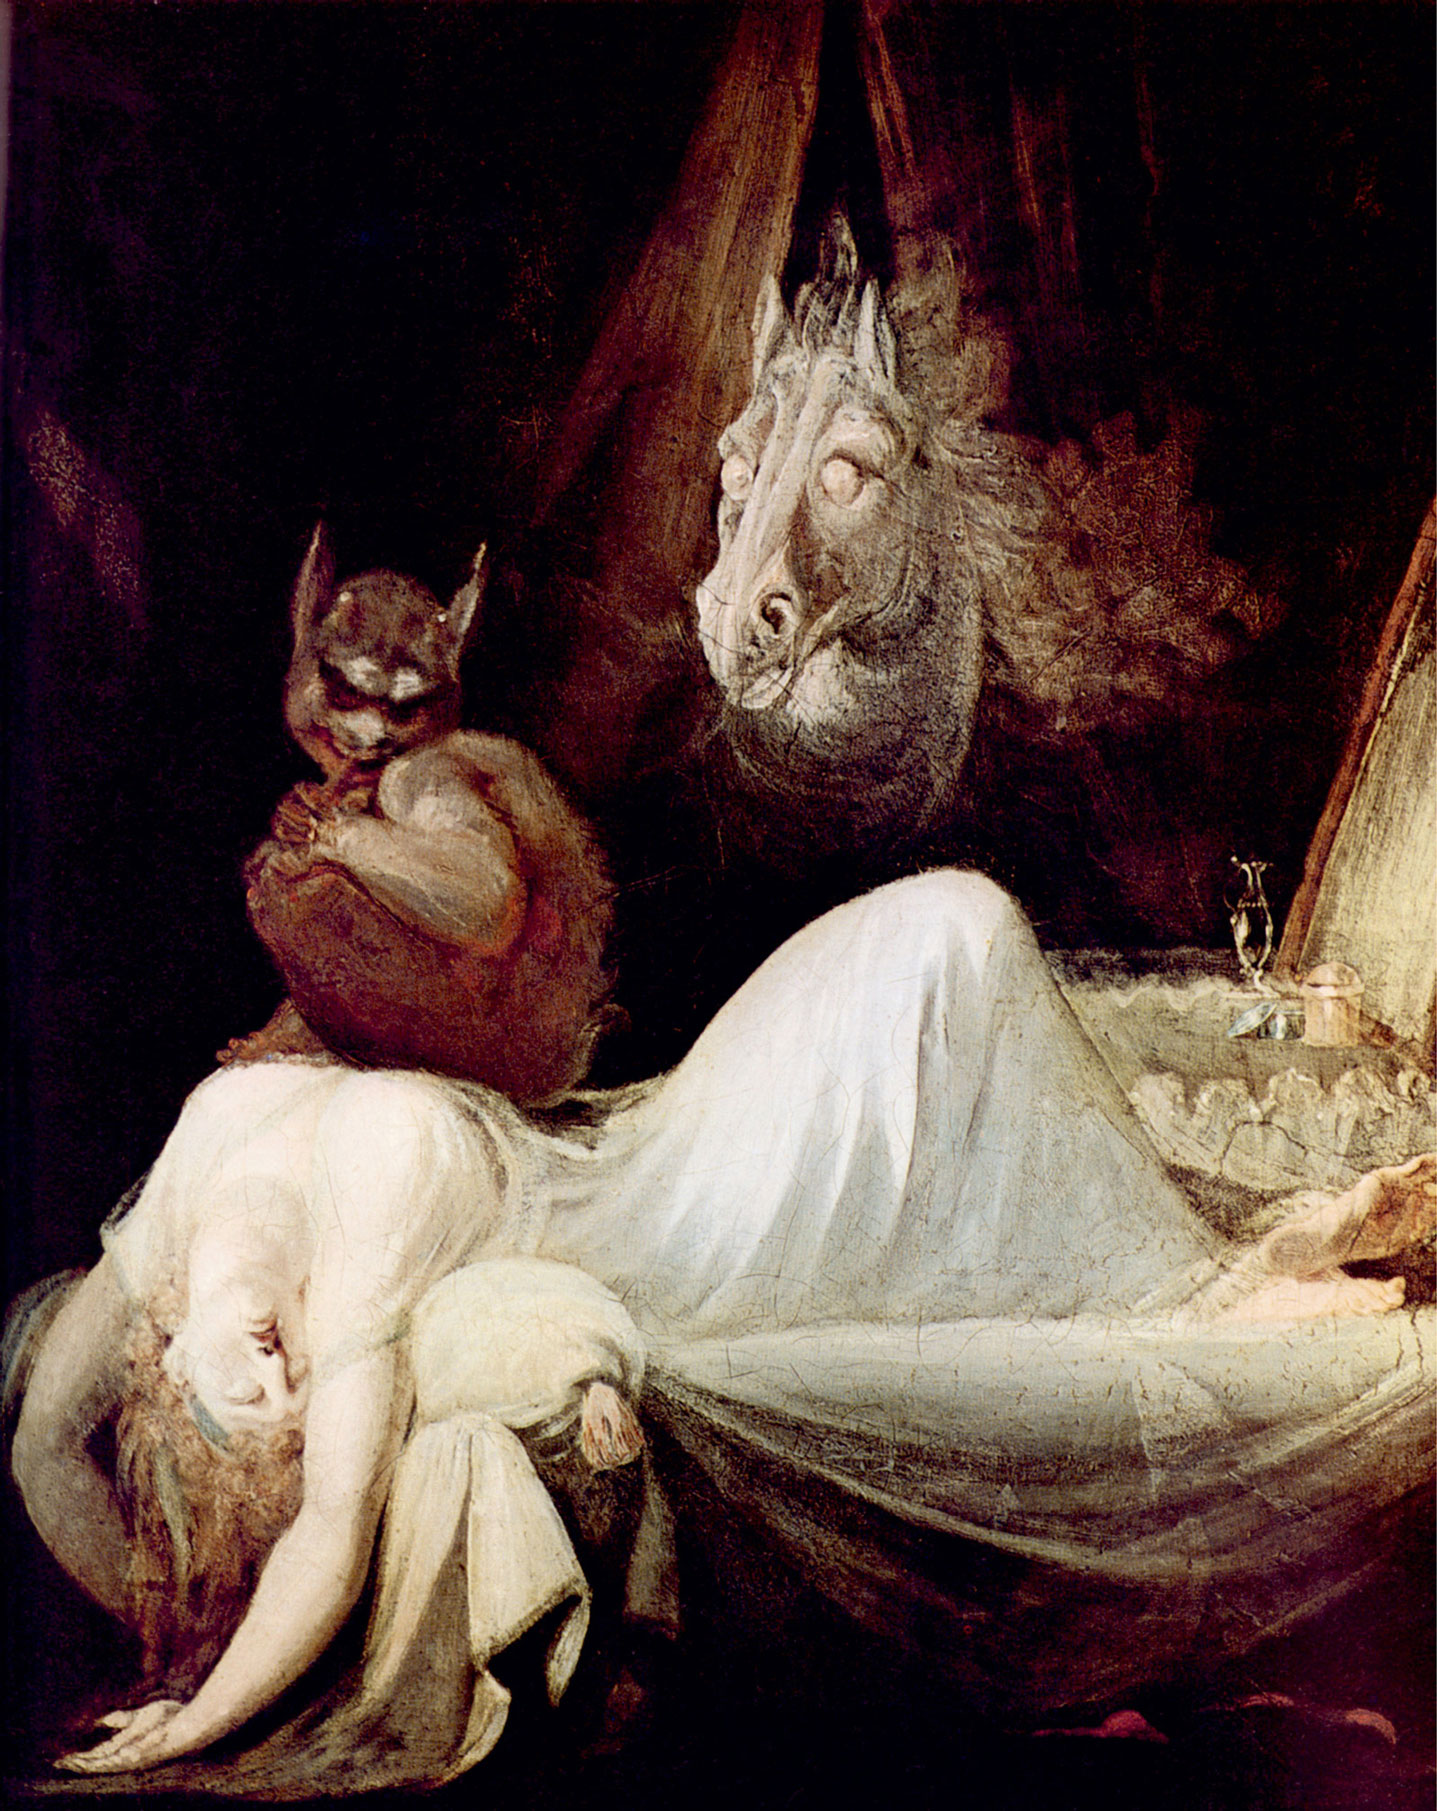 A circa 1791 painting by John Henry Fuseli titled “The Nightmare.”